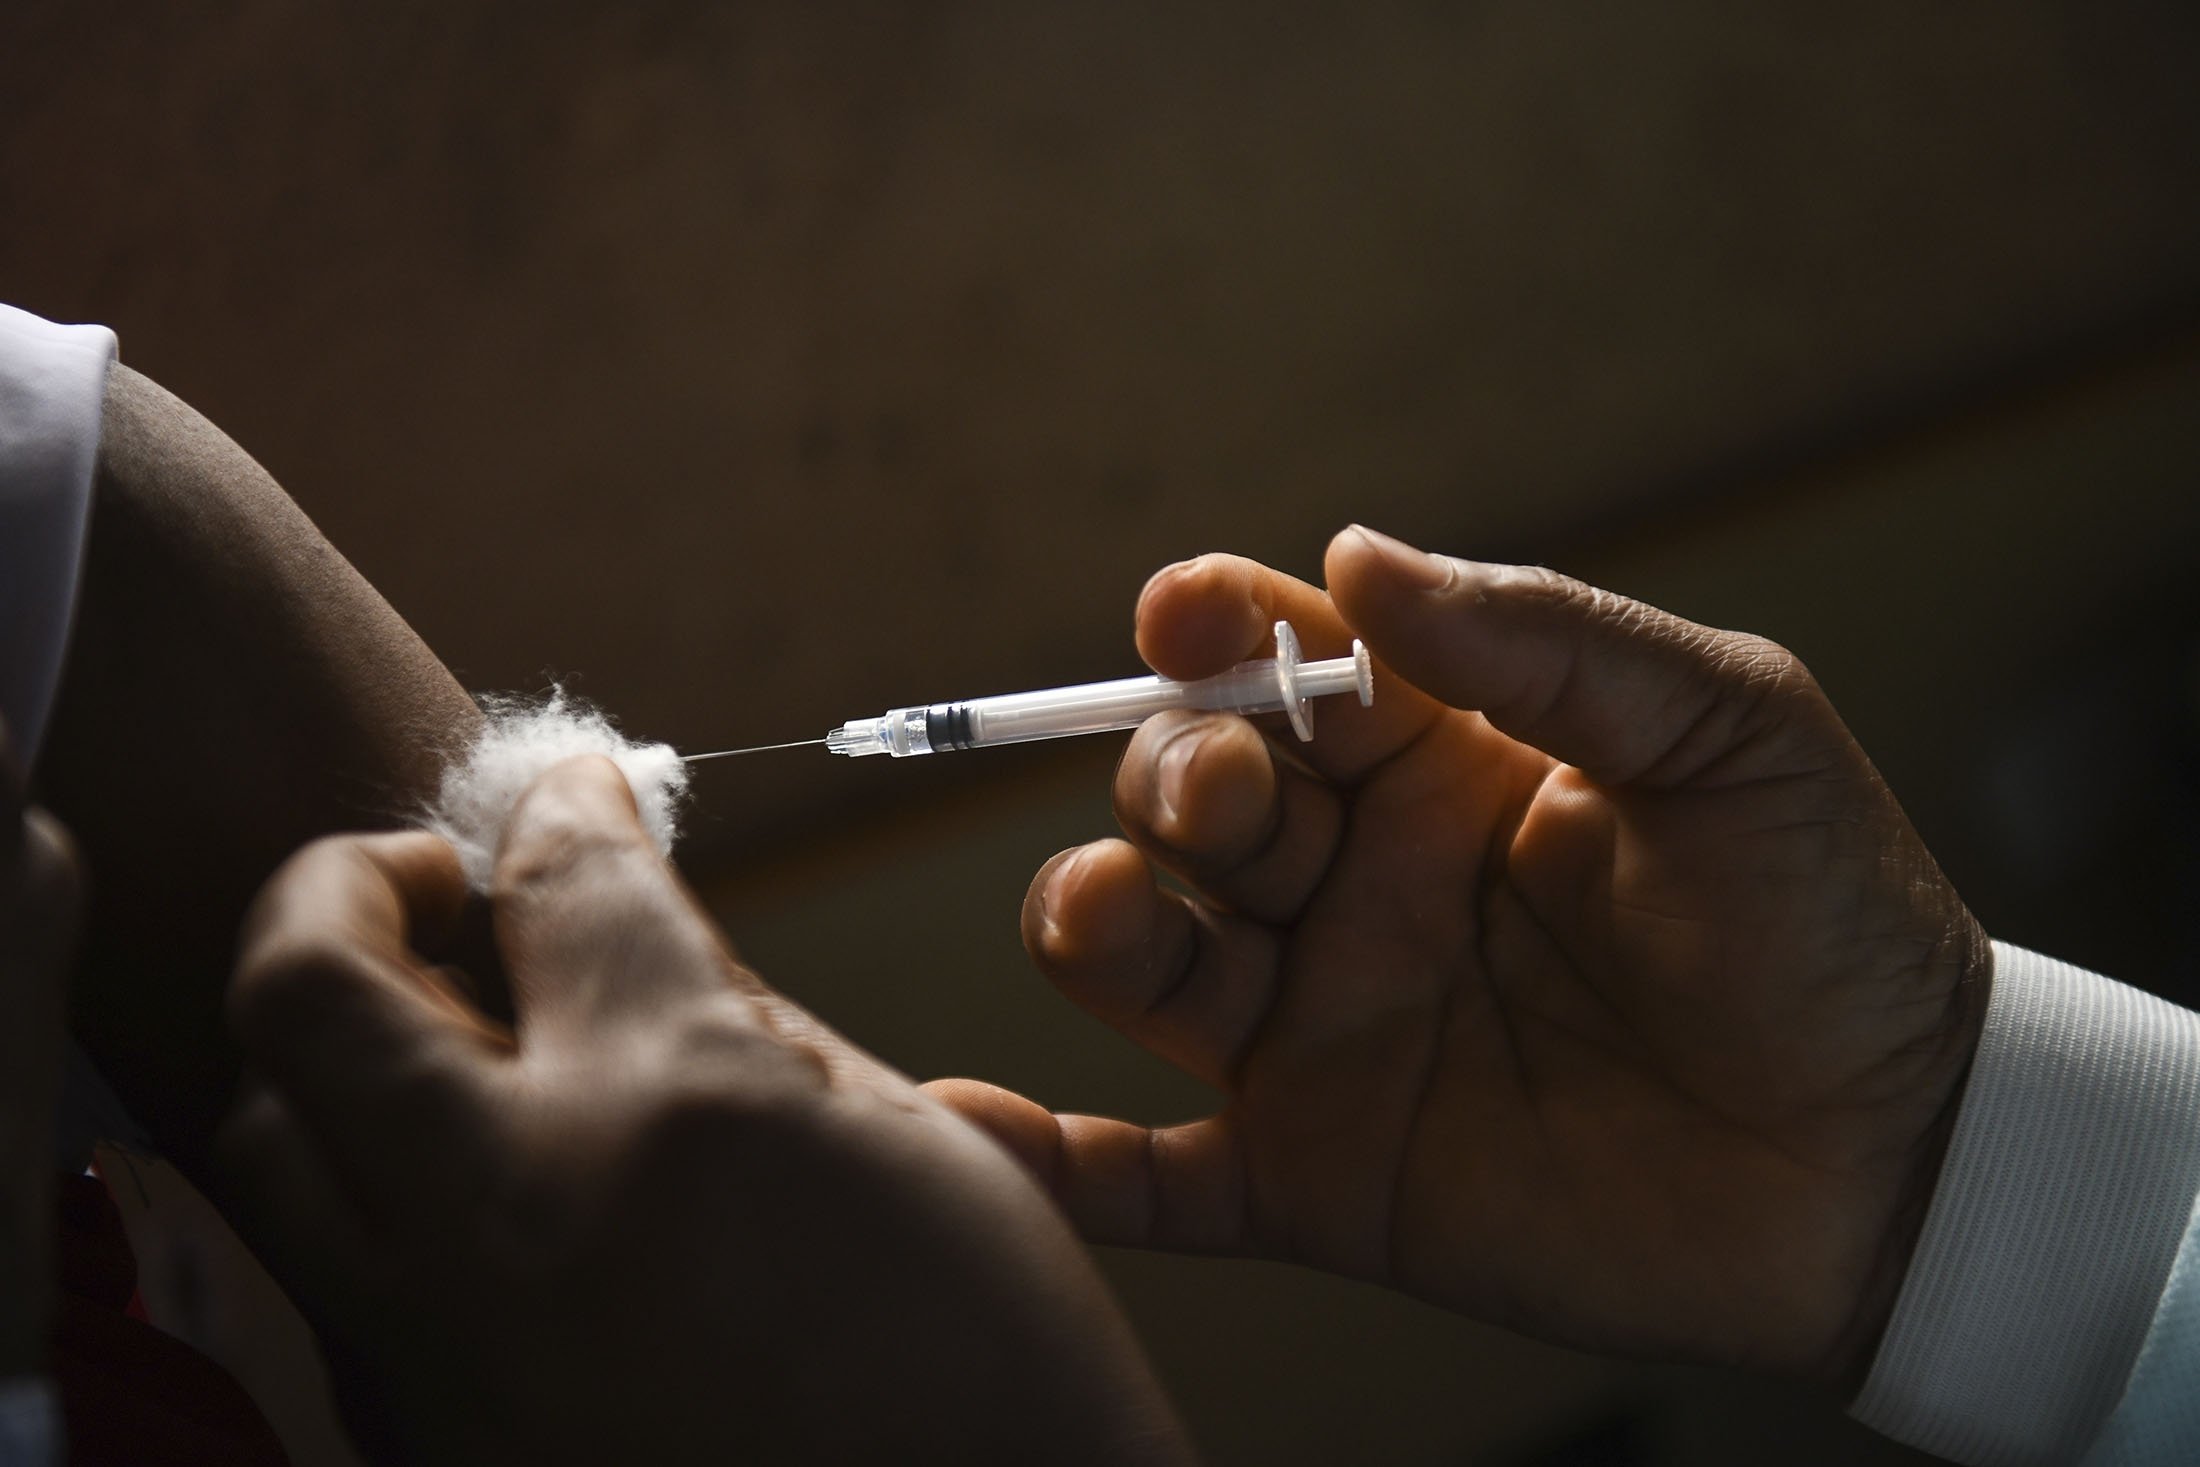 An AstraZeneca COVID-19 vaccine is administered at the Ndirande Health Centre in Blantyre Malawi, March 29, 2021. (AP Photo)